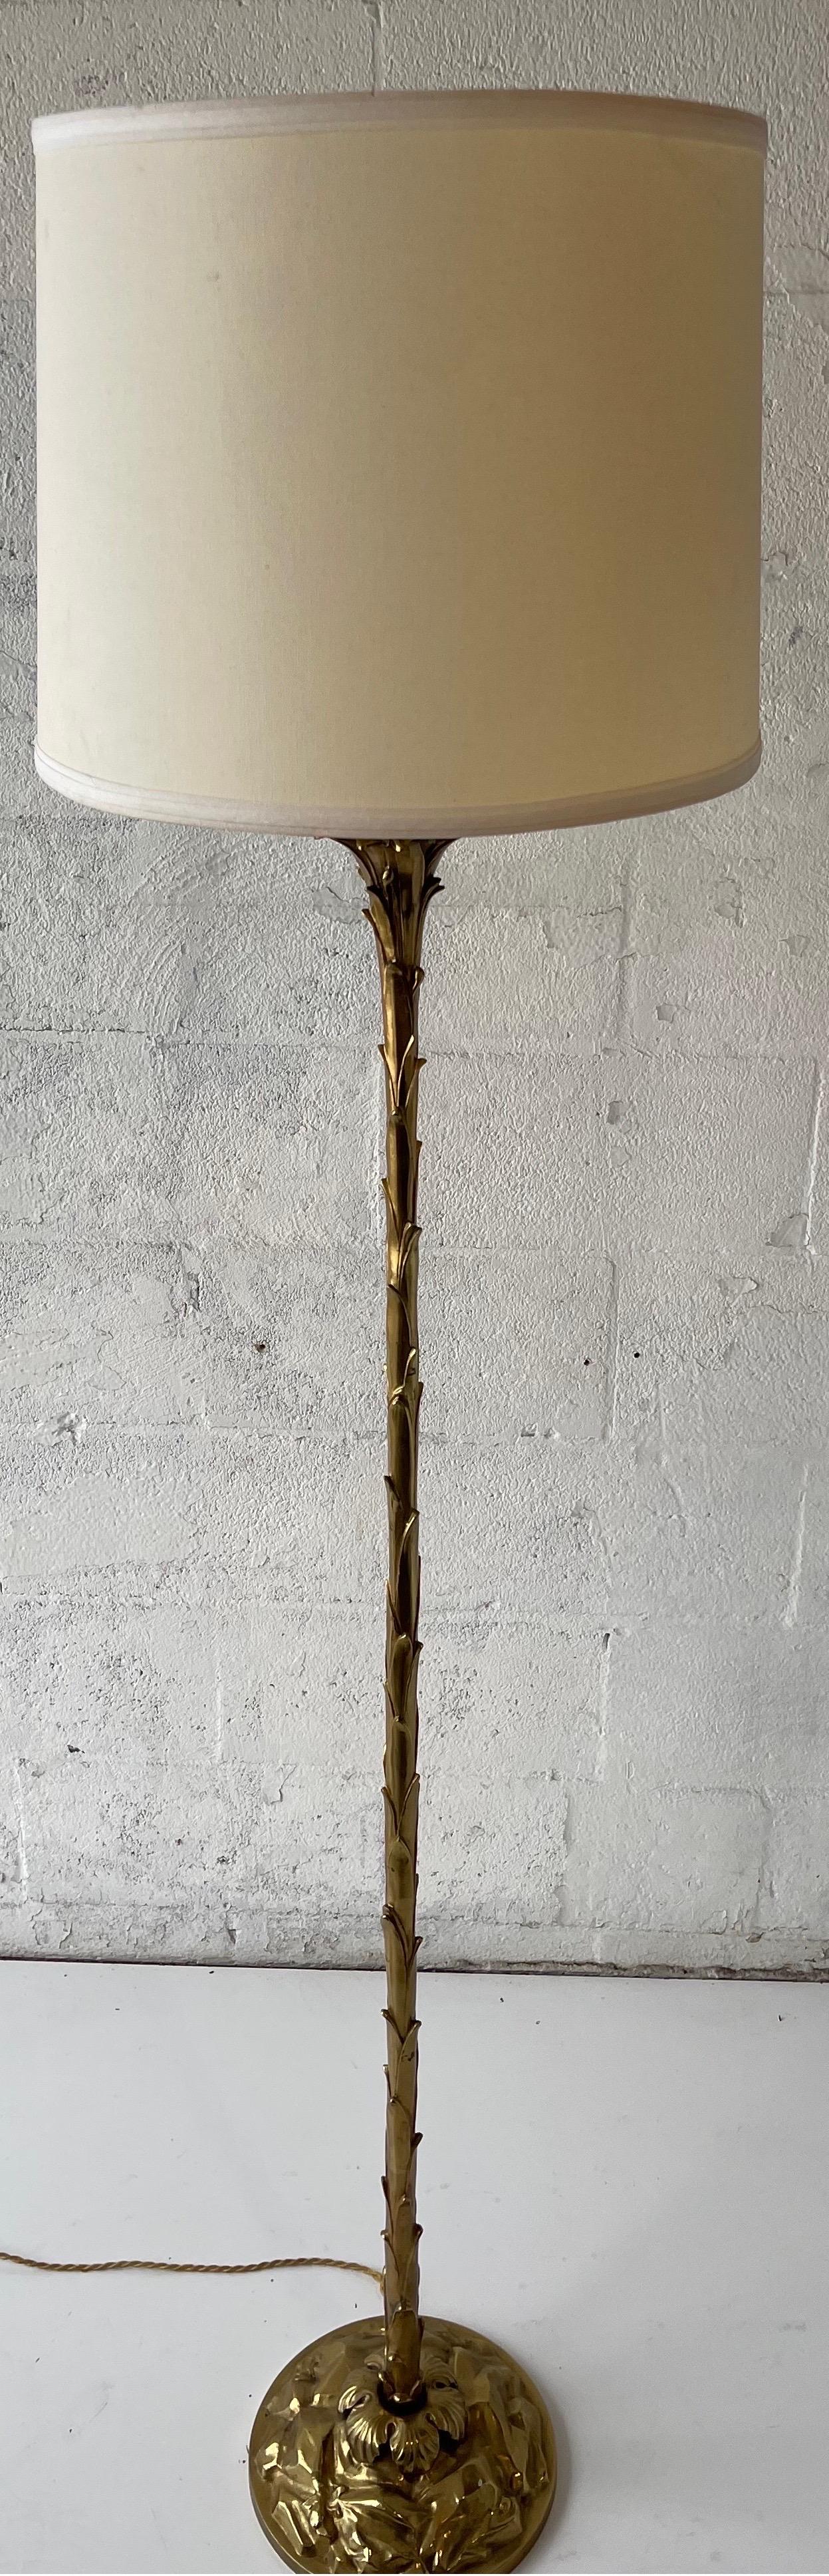 Superb quality Maison Bagués bronze floor lamp
France , circa 1950.
Wire For US use. 
One Socket, 100watts Max Bulb or 13 watts LED.
Shade Dimensions : 14/12/16.